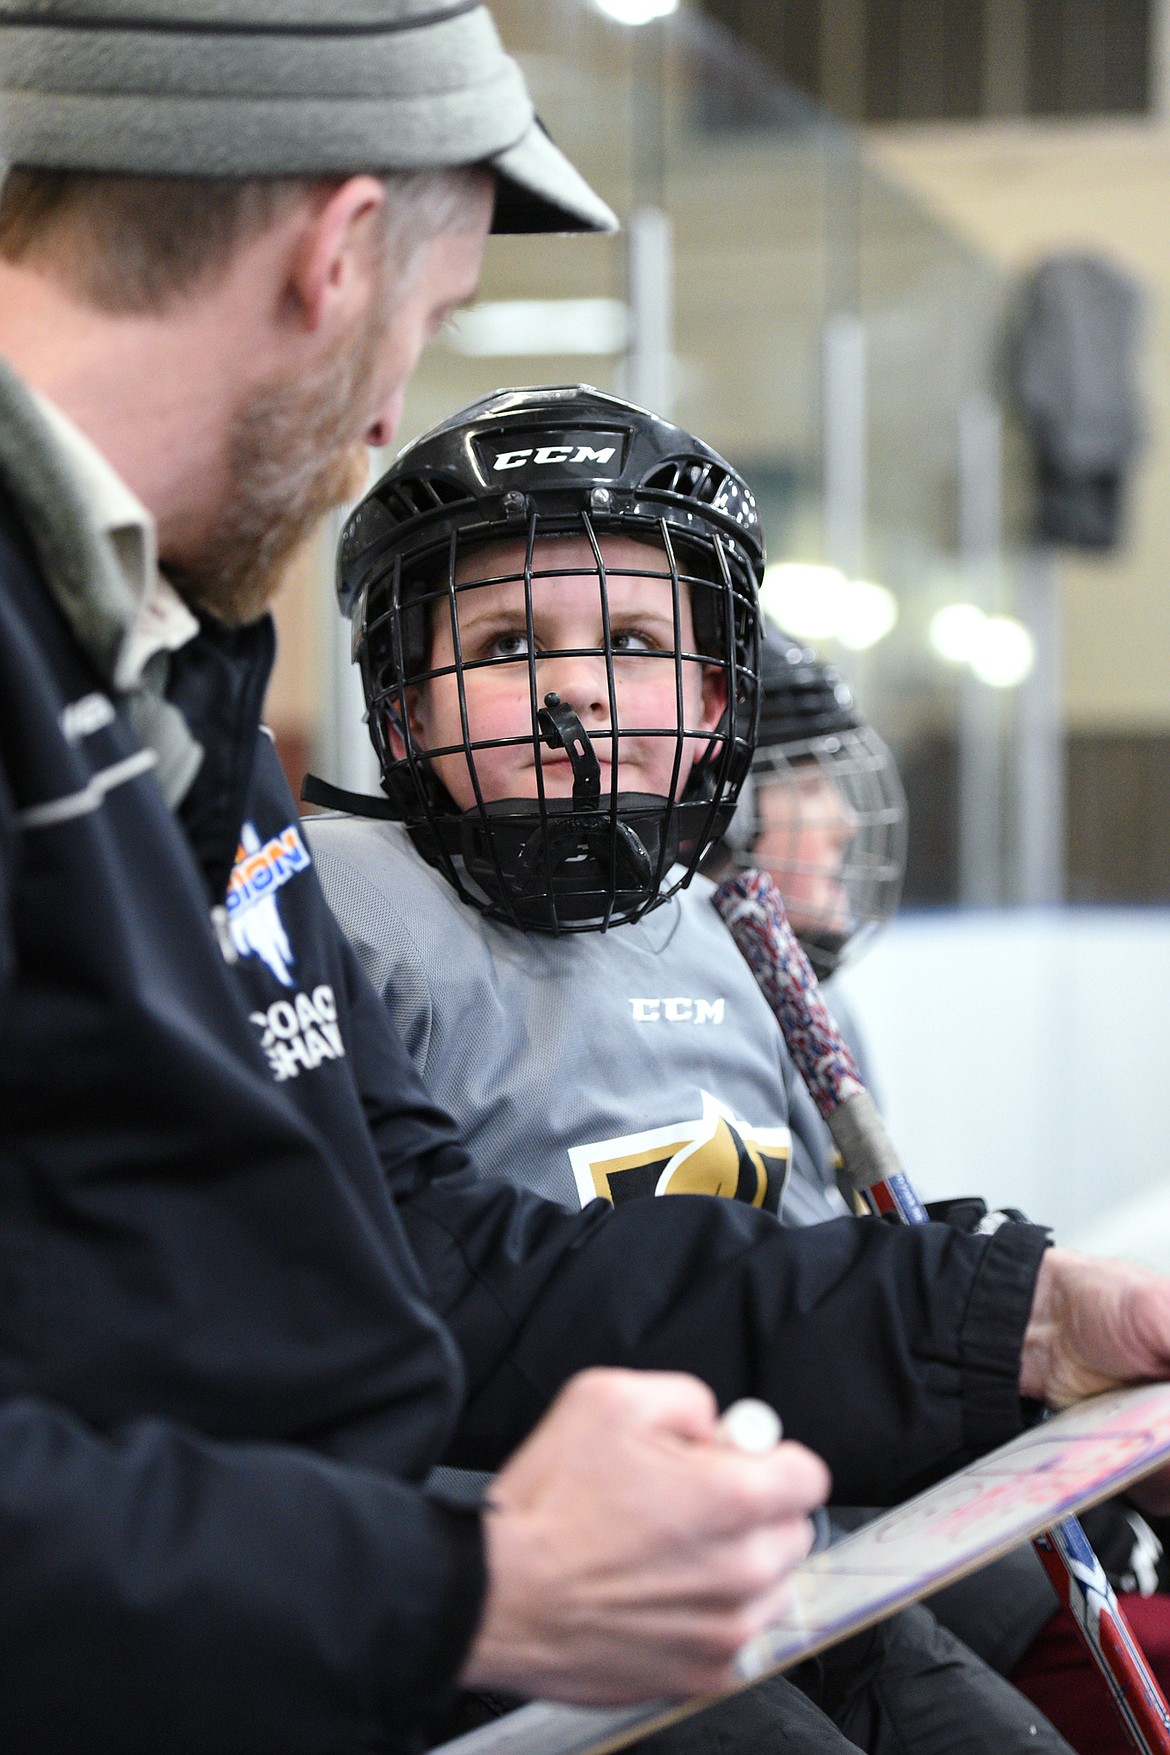 Coach Shawn Baker speaks to one of his players during a Yeti League game.